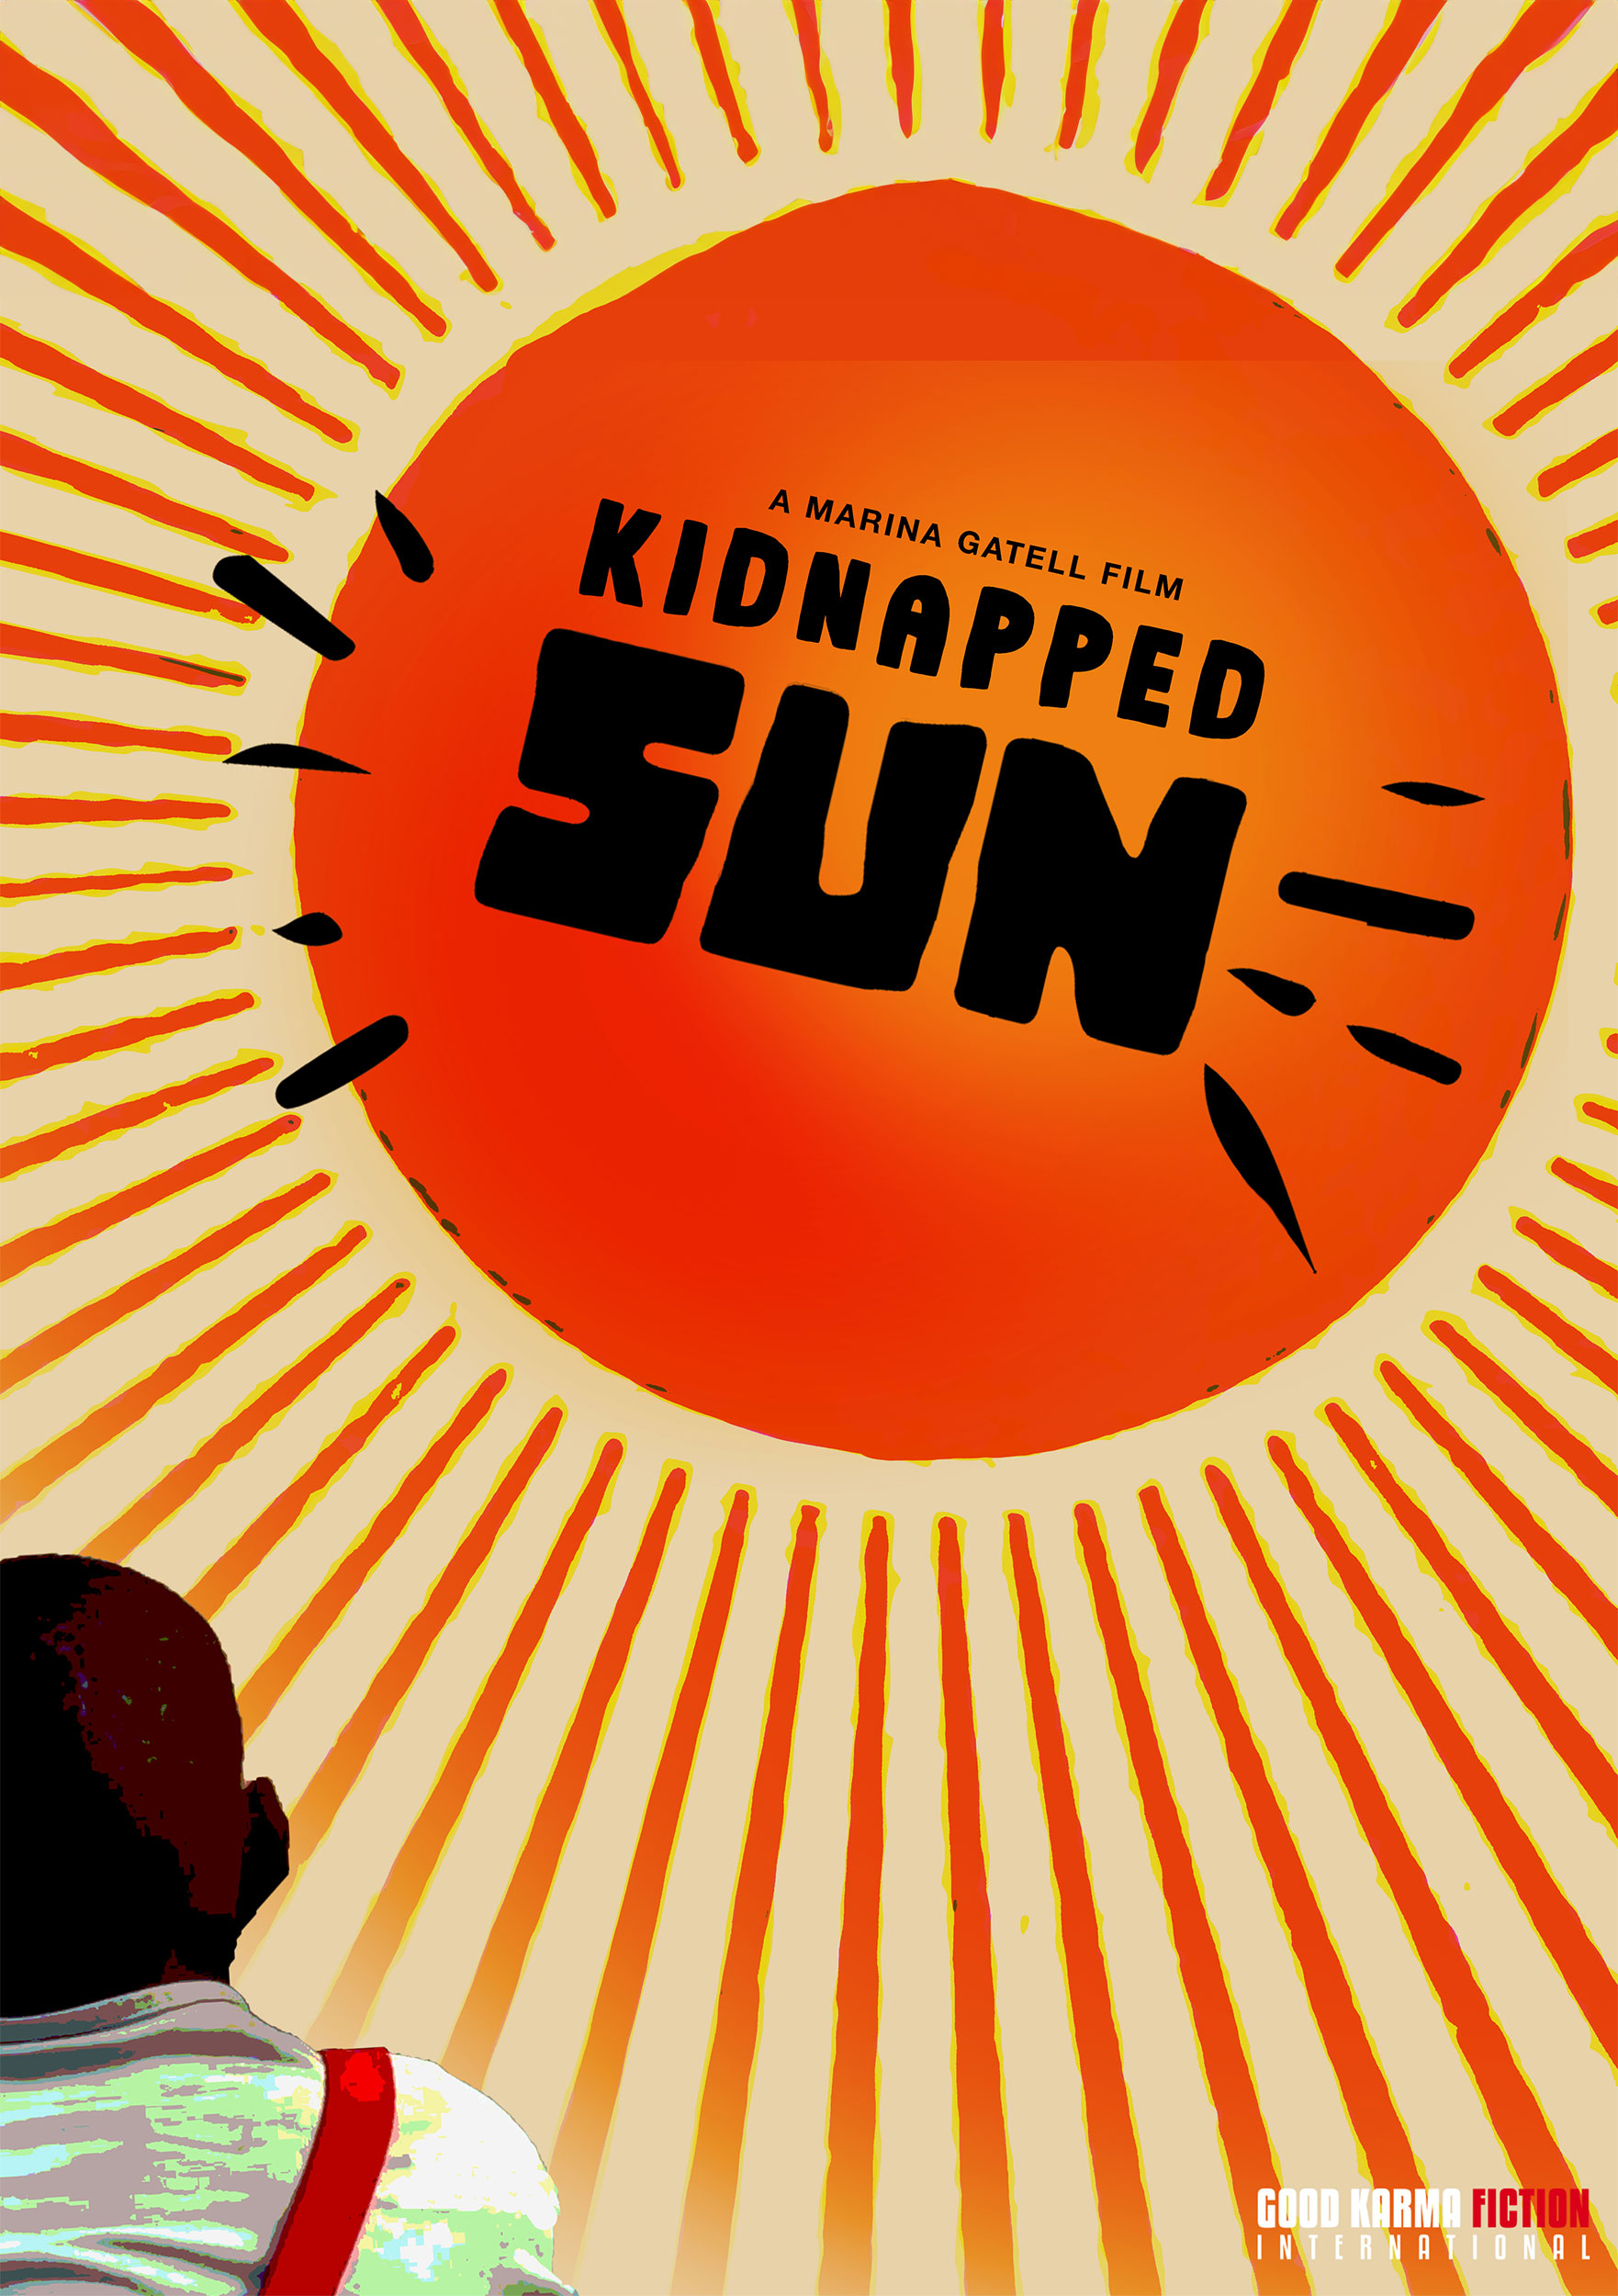 <i  id="iconinf1" class="fas fa-info" aria-hidden="true"></i><br> <h3>KIDNAPPED SUN</h3><br><p>The Sun has been kidnapped and only the children from a small orfanage in Nairobi can rescue it ... <br><br><b>-Phantasy-Crime, 90 min-</b></p> <br><br><b>-Creator: Marina Gatell-</b></p>